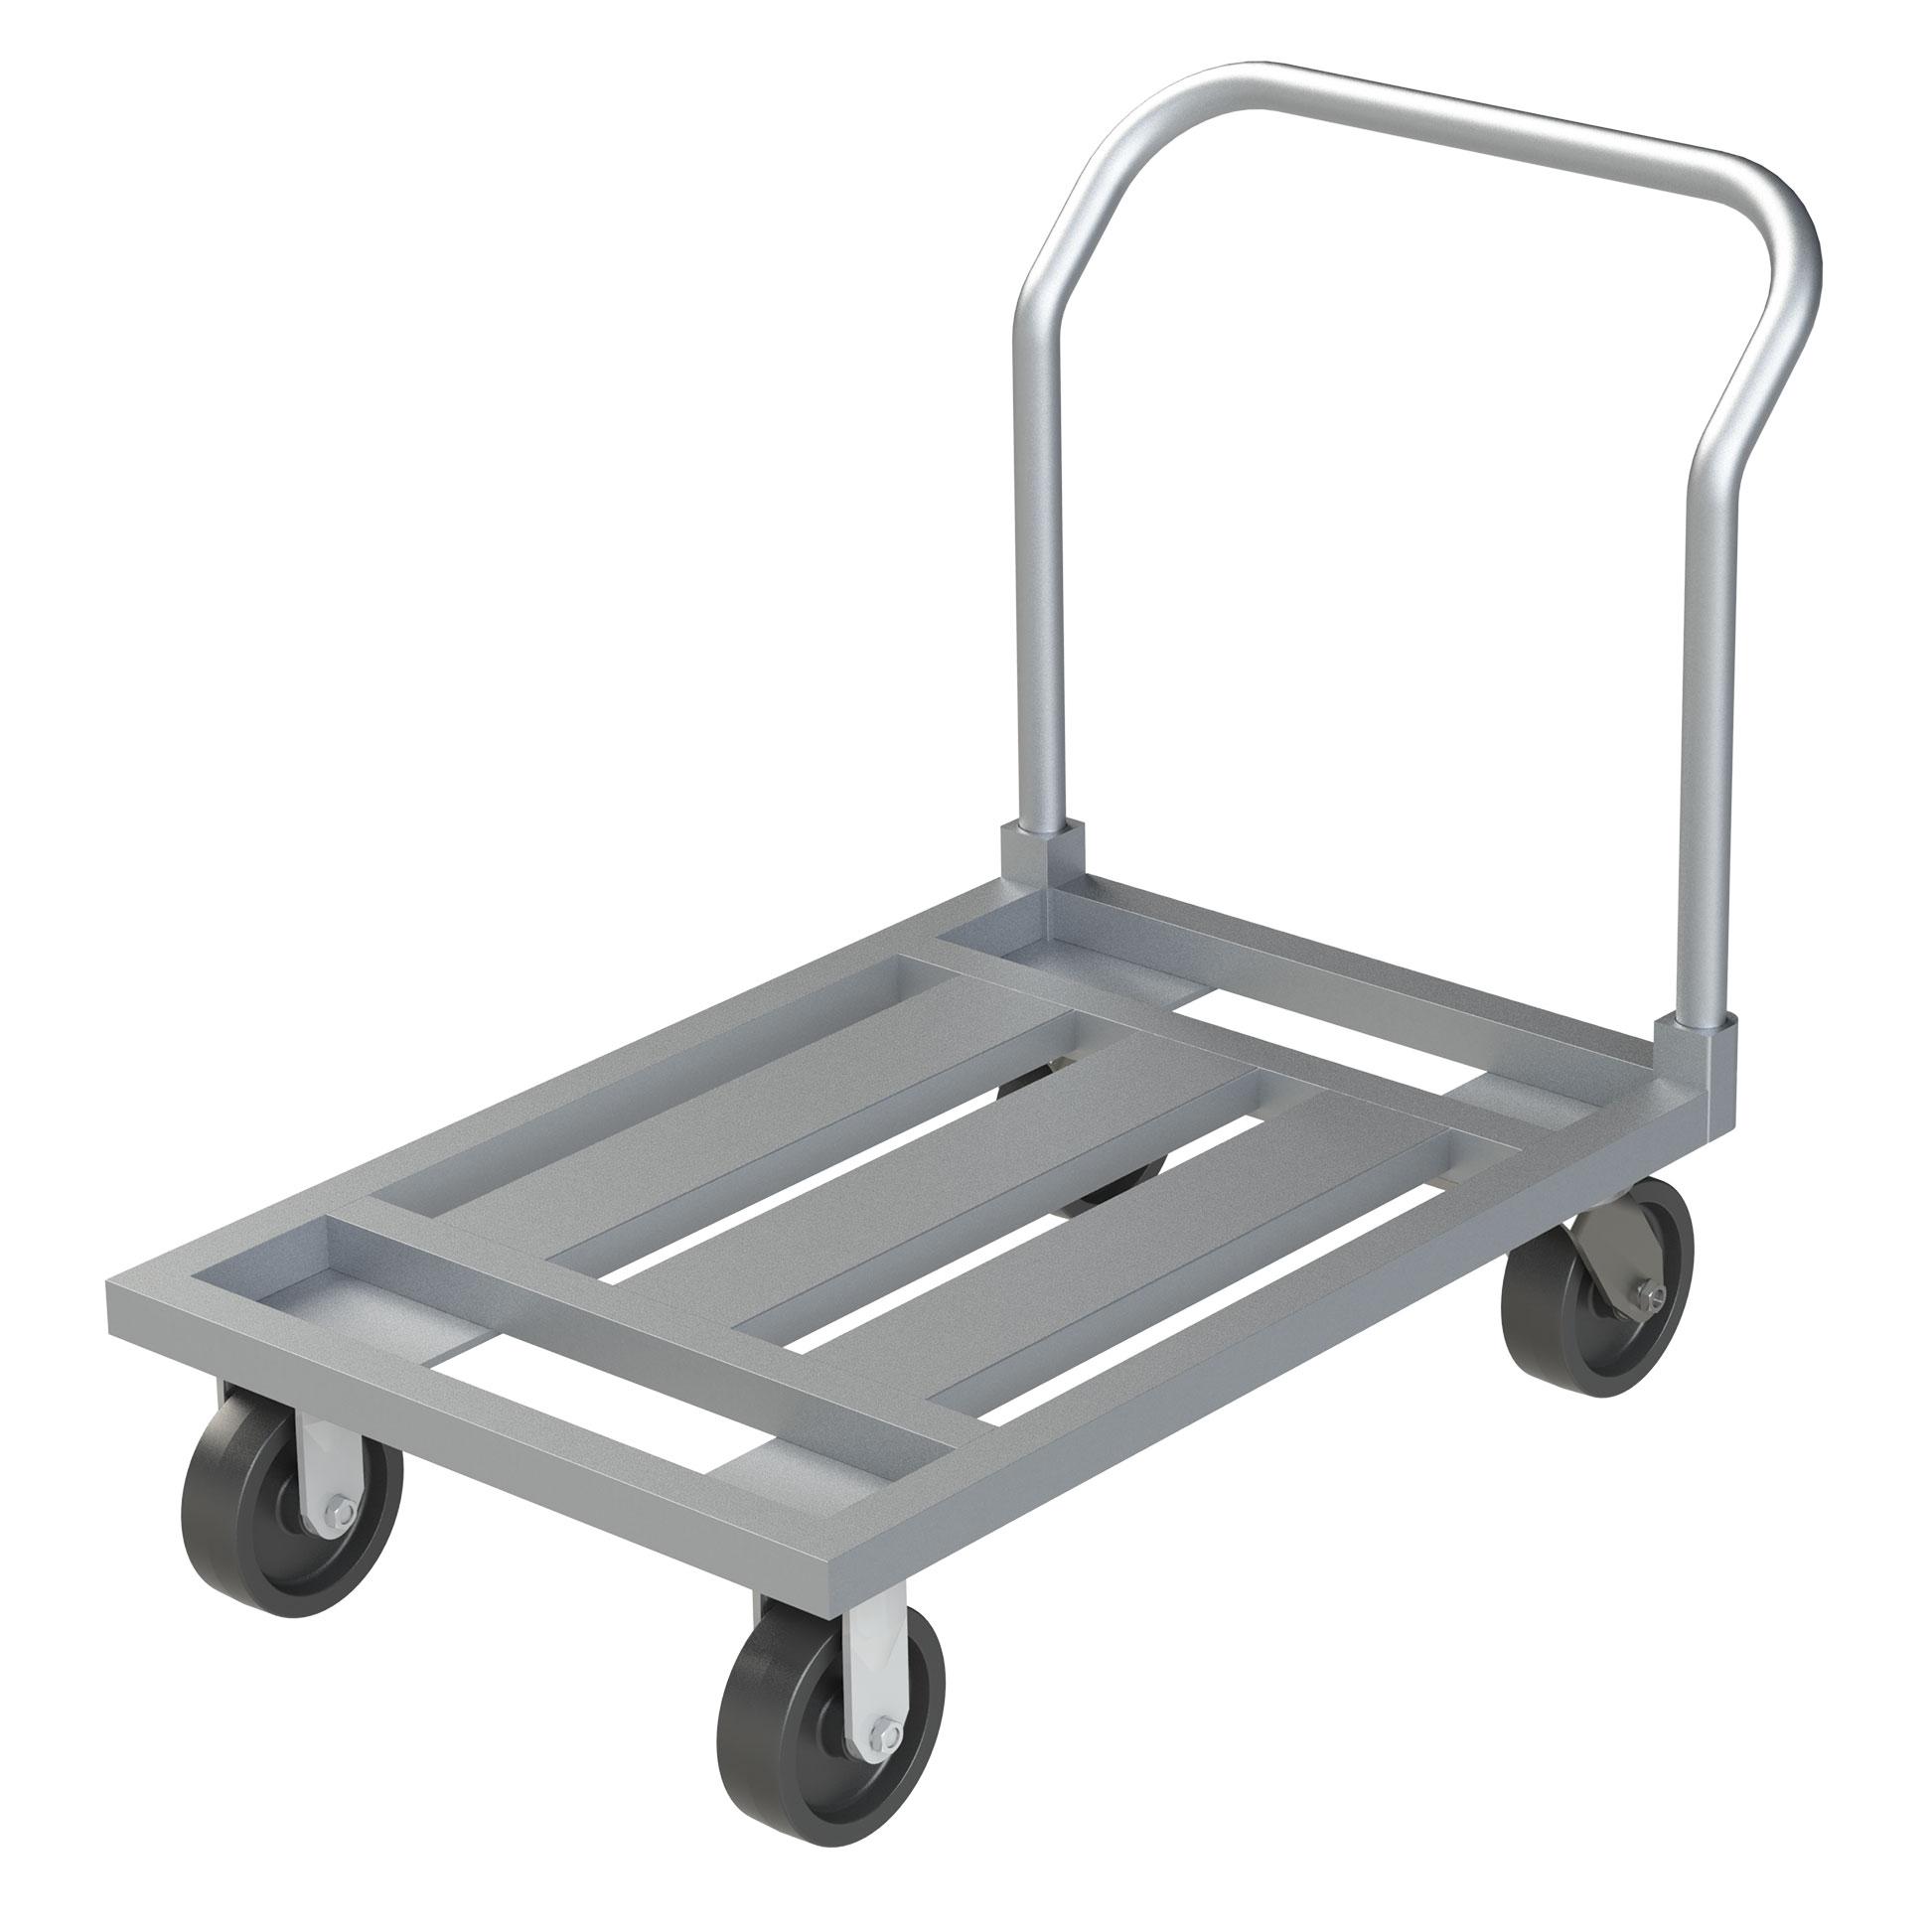 Product: SU35 Mobile Dunnage Rack - Choice Equipment Company